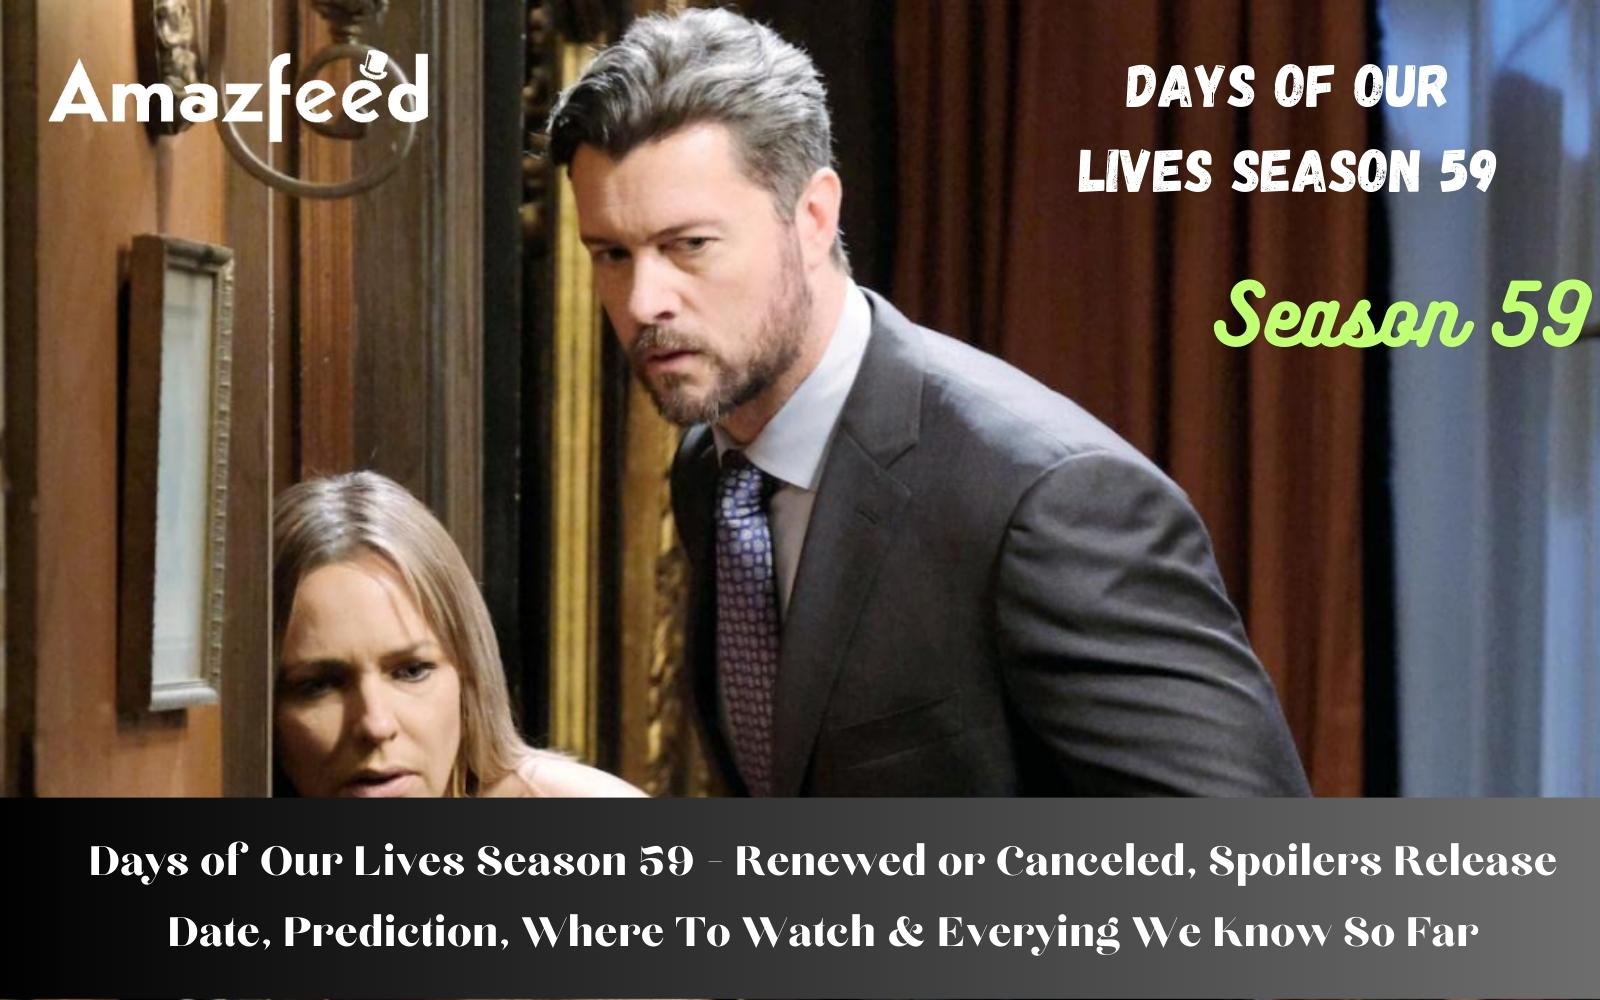 Days of Our Lives Season 59 Renewed or Canceled, Spoilers Release